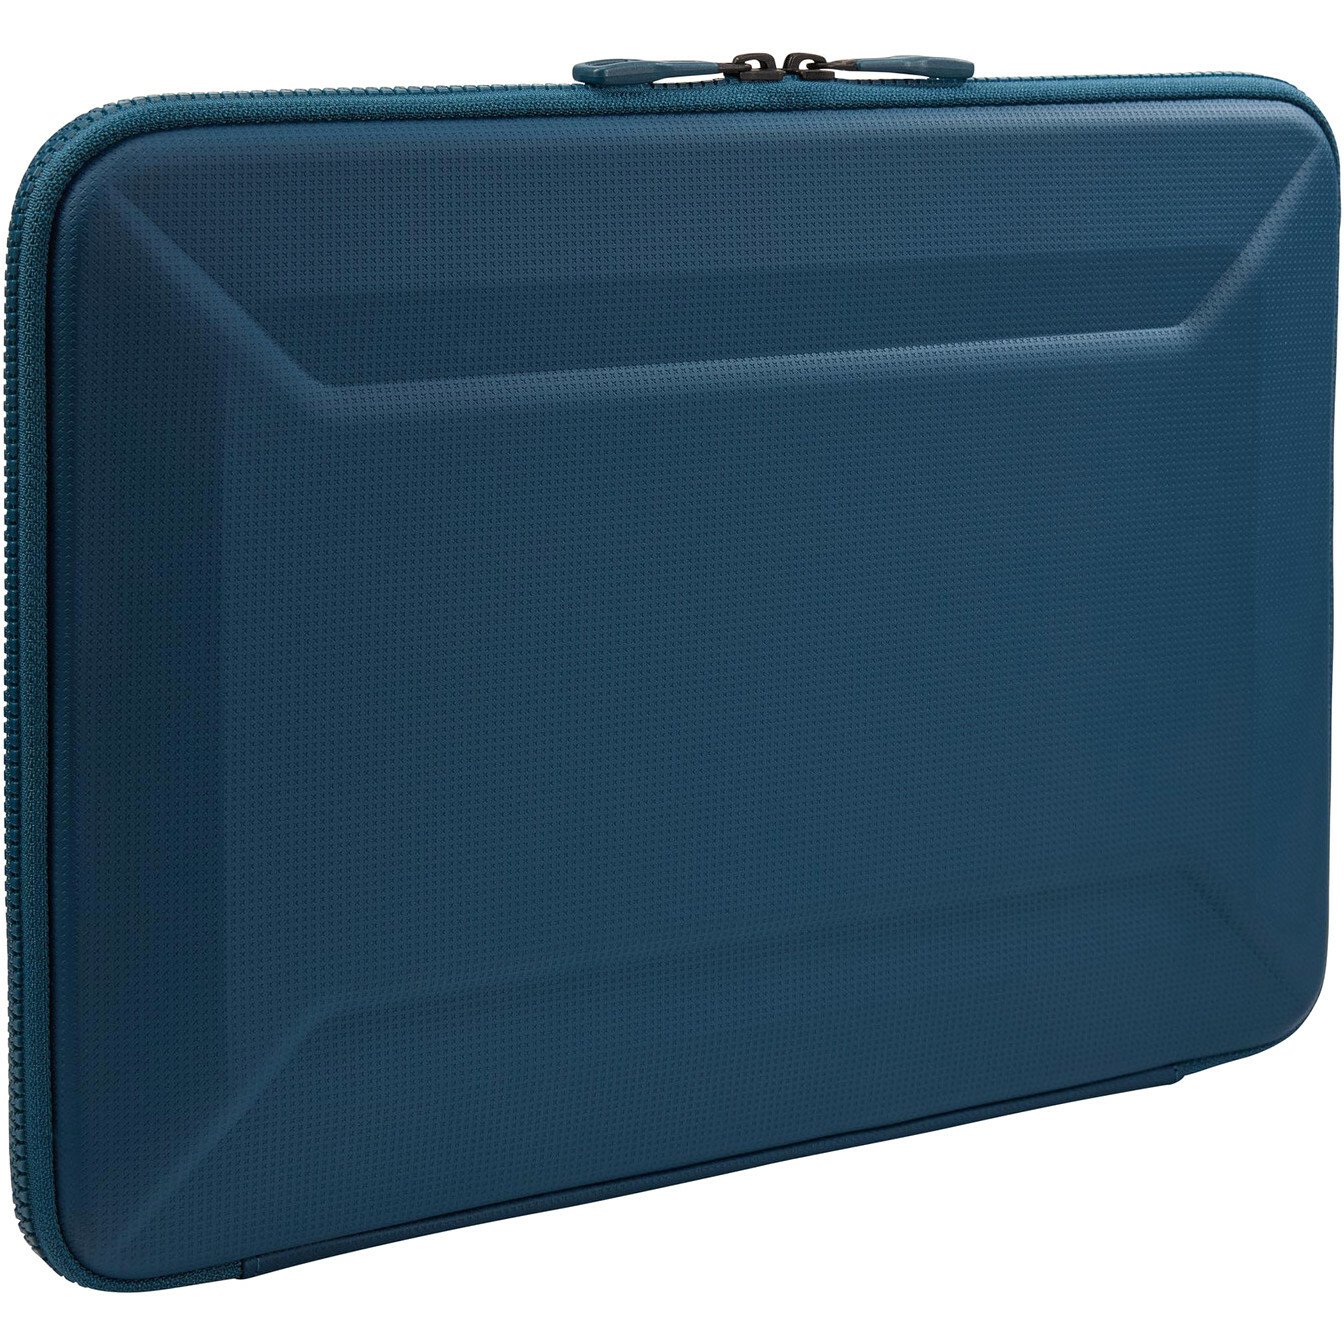 Thule Gauntlet Carrying Case (Sleeve) for 35.6 cm (14") to 40.6 cm (16") Apple MacBook Pro